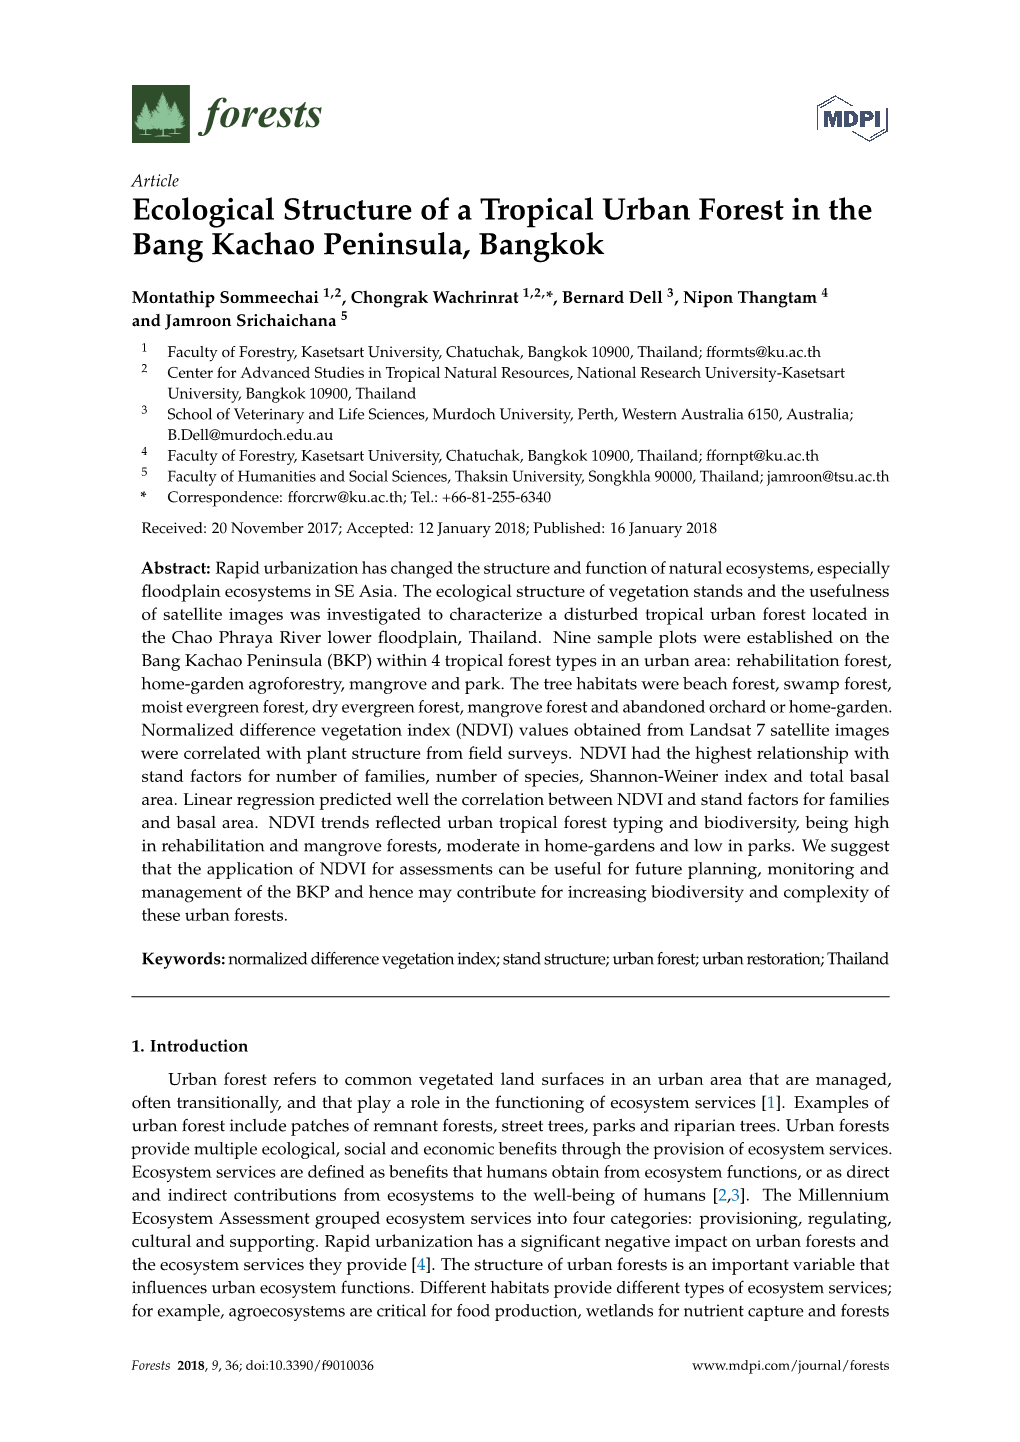 Ecological Structure of a Tropical Urban Forest in the Bang Kachao Peninsula, Bangkok